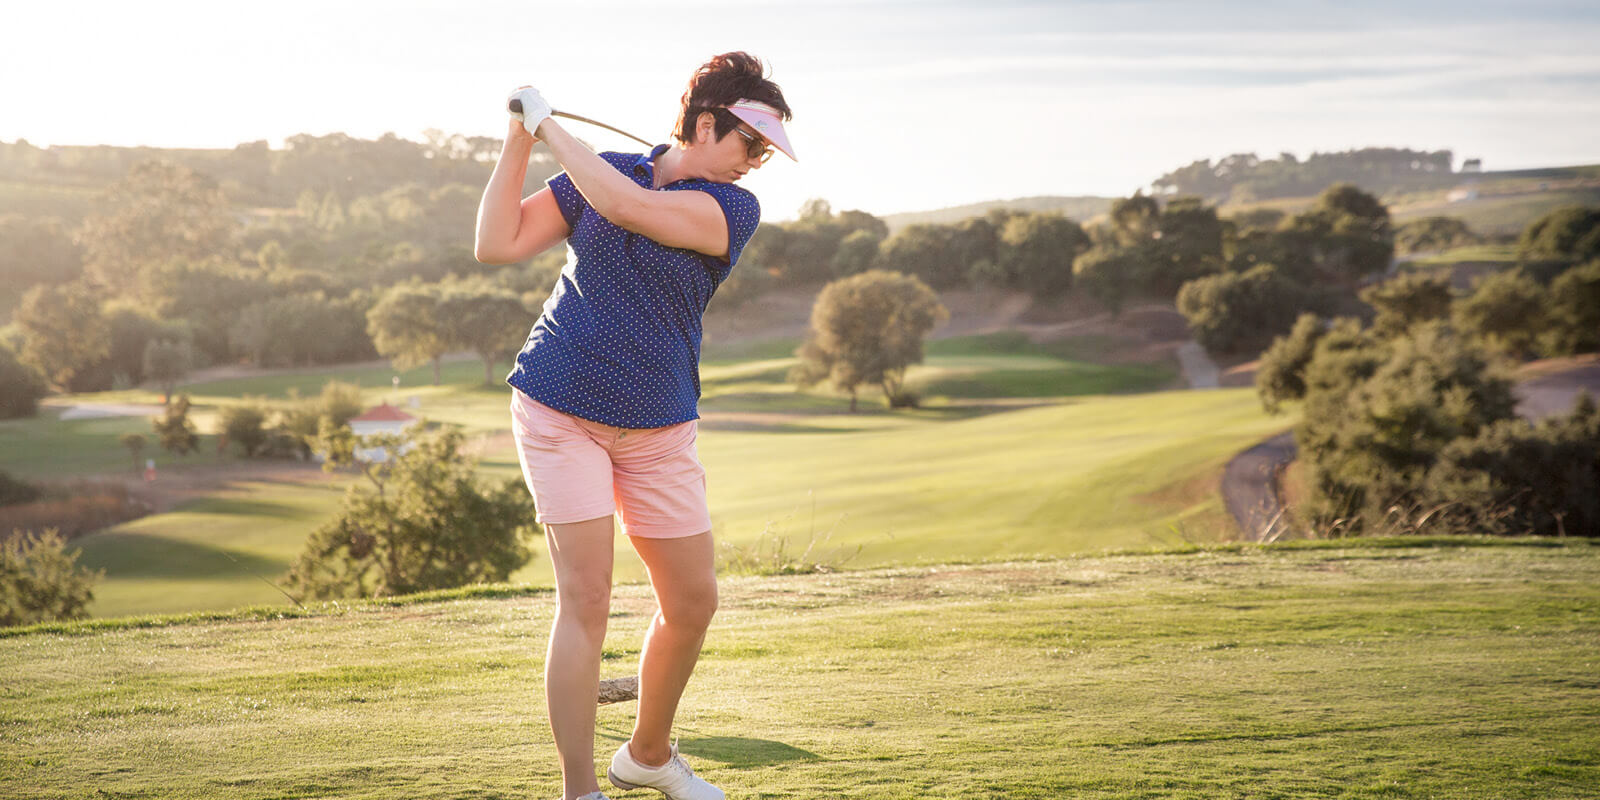 A woman about to swing a golf club